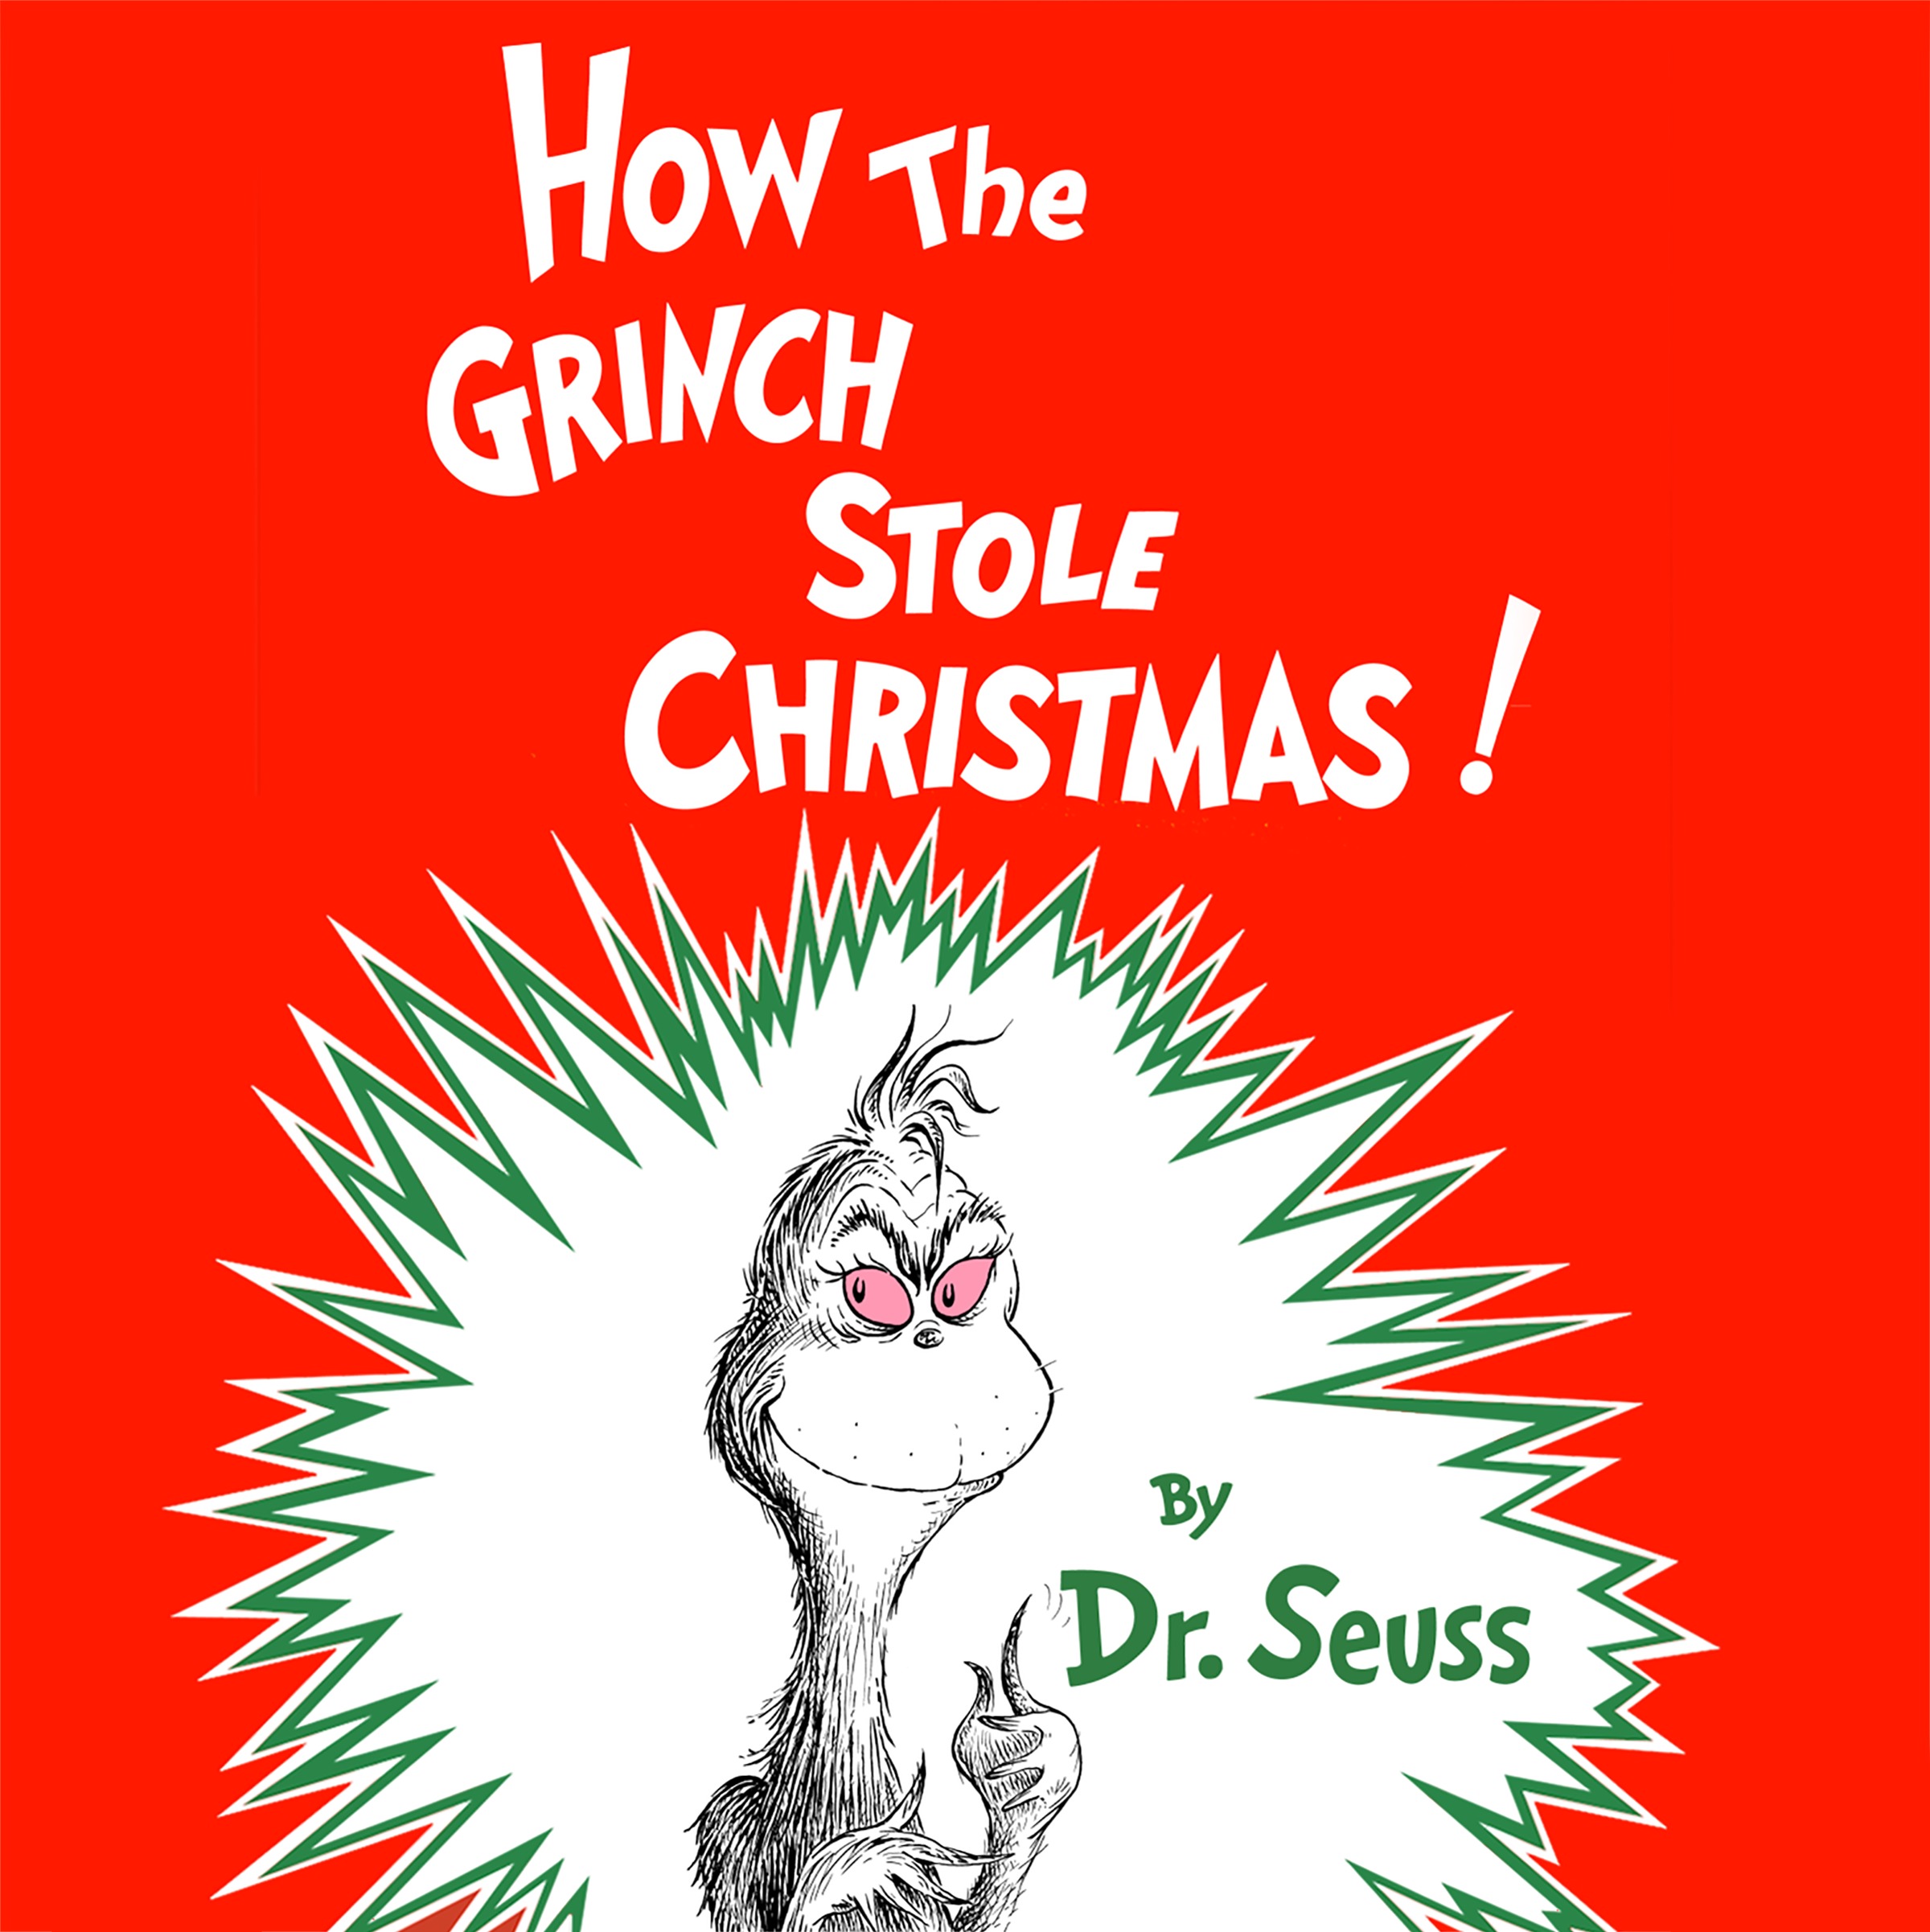 How The Grinch Stole Christmas.